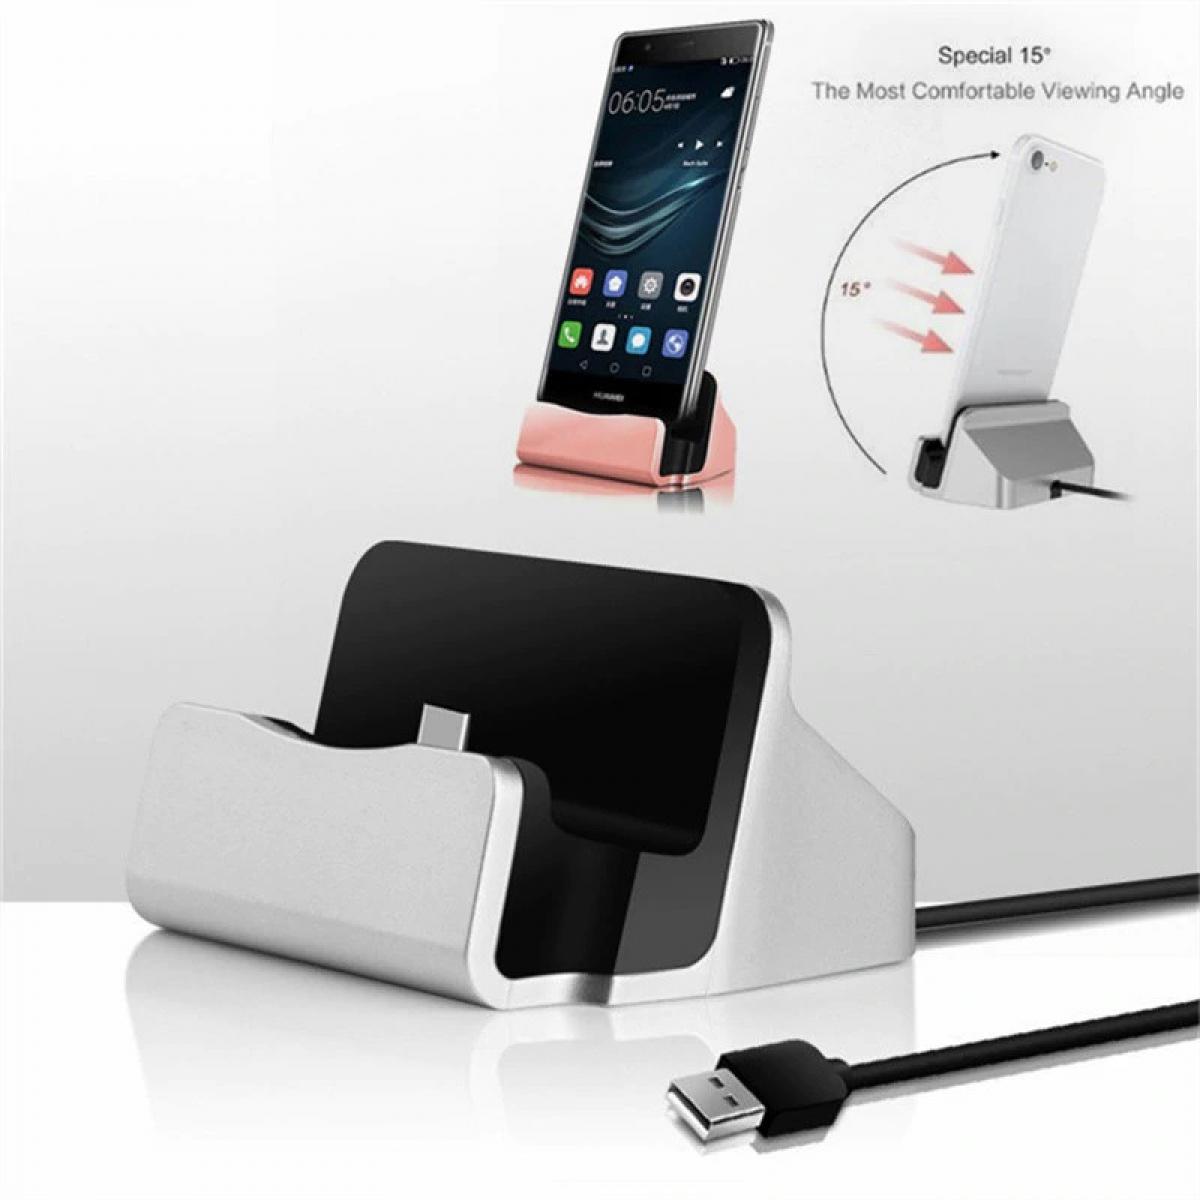 Shot - Station d'Accueil de Chargement pour HUAWEI Mate 8 Smartphone Micro USB Support Chargeur Bureau (ROSE) - Station d'accueil smartphone